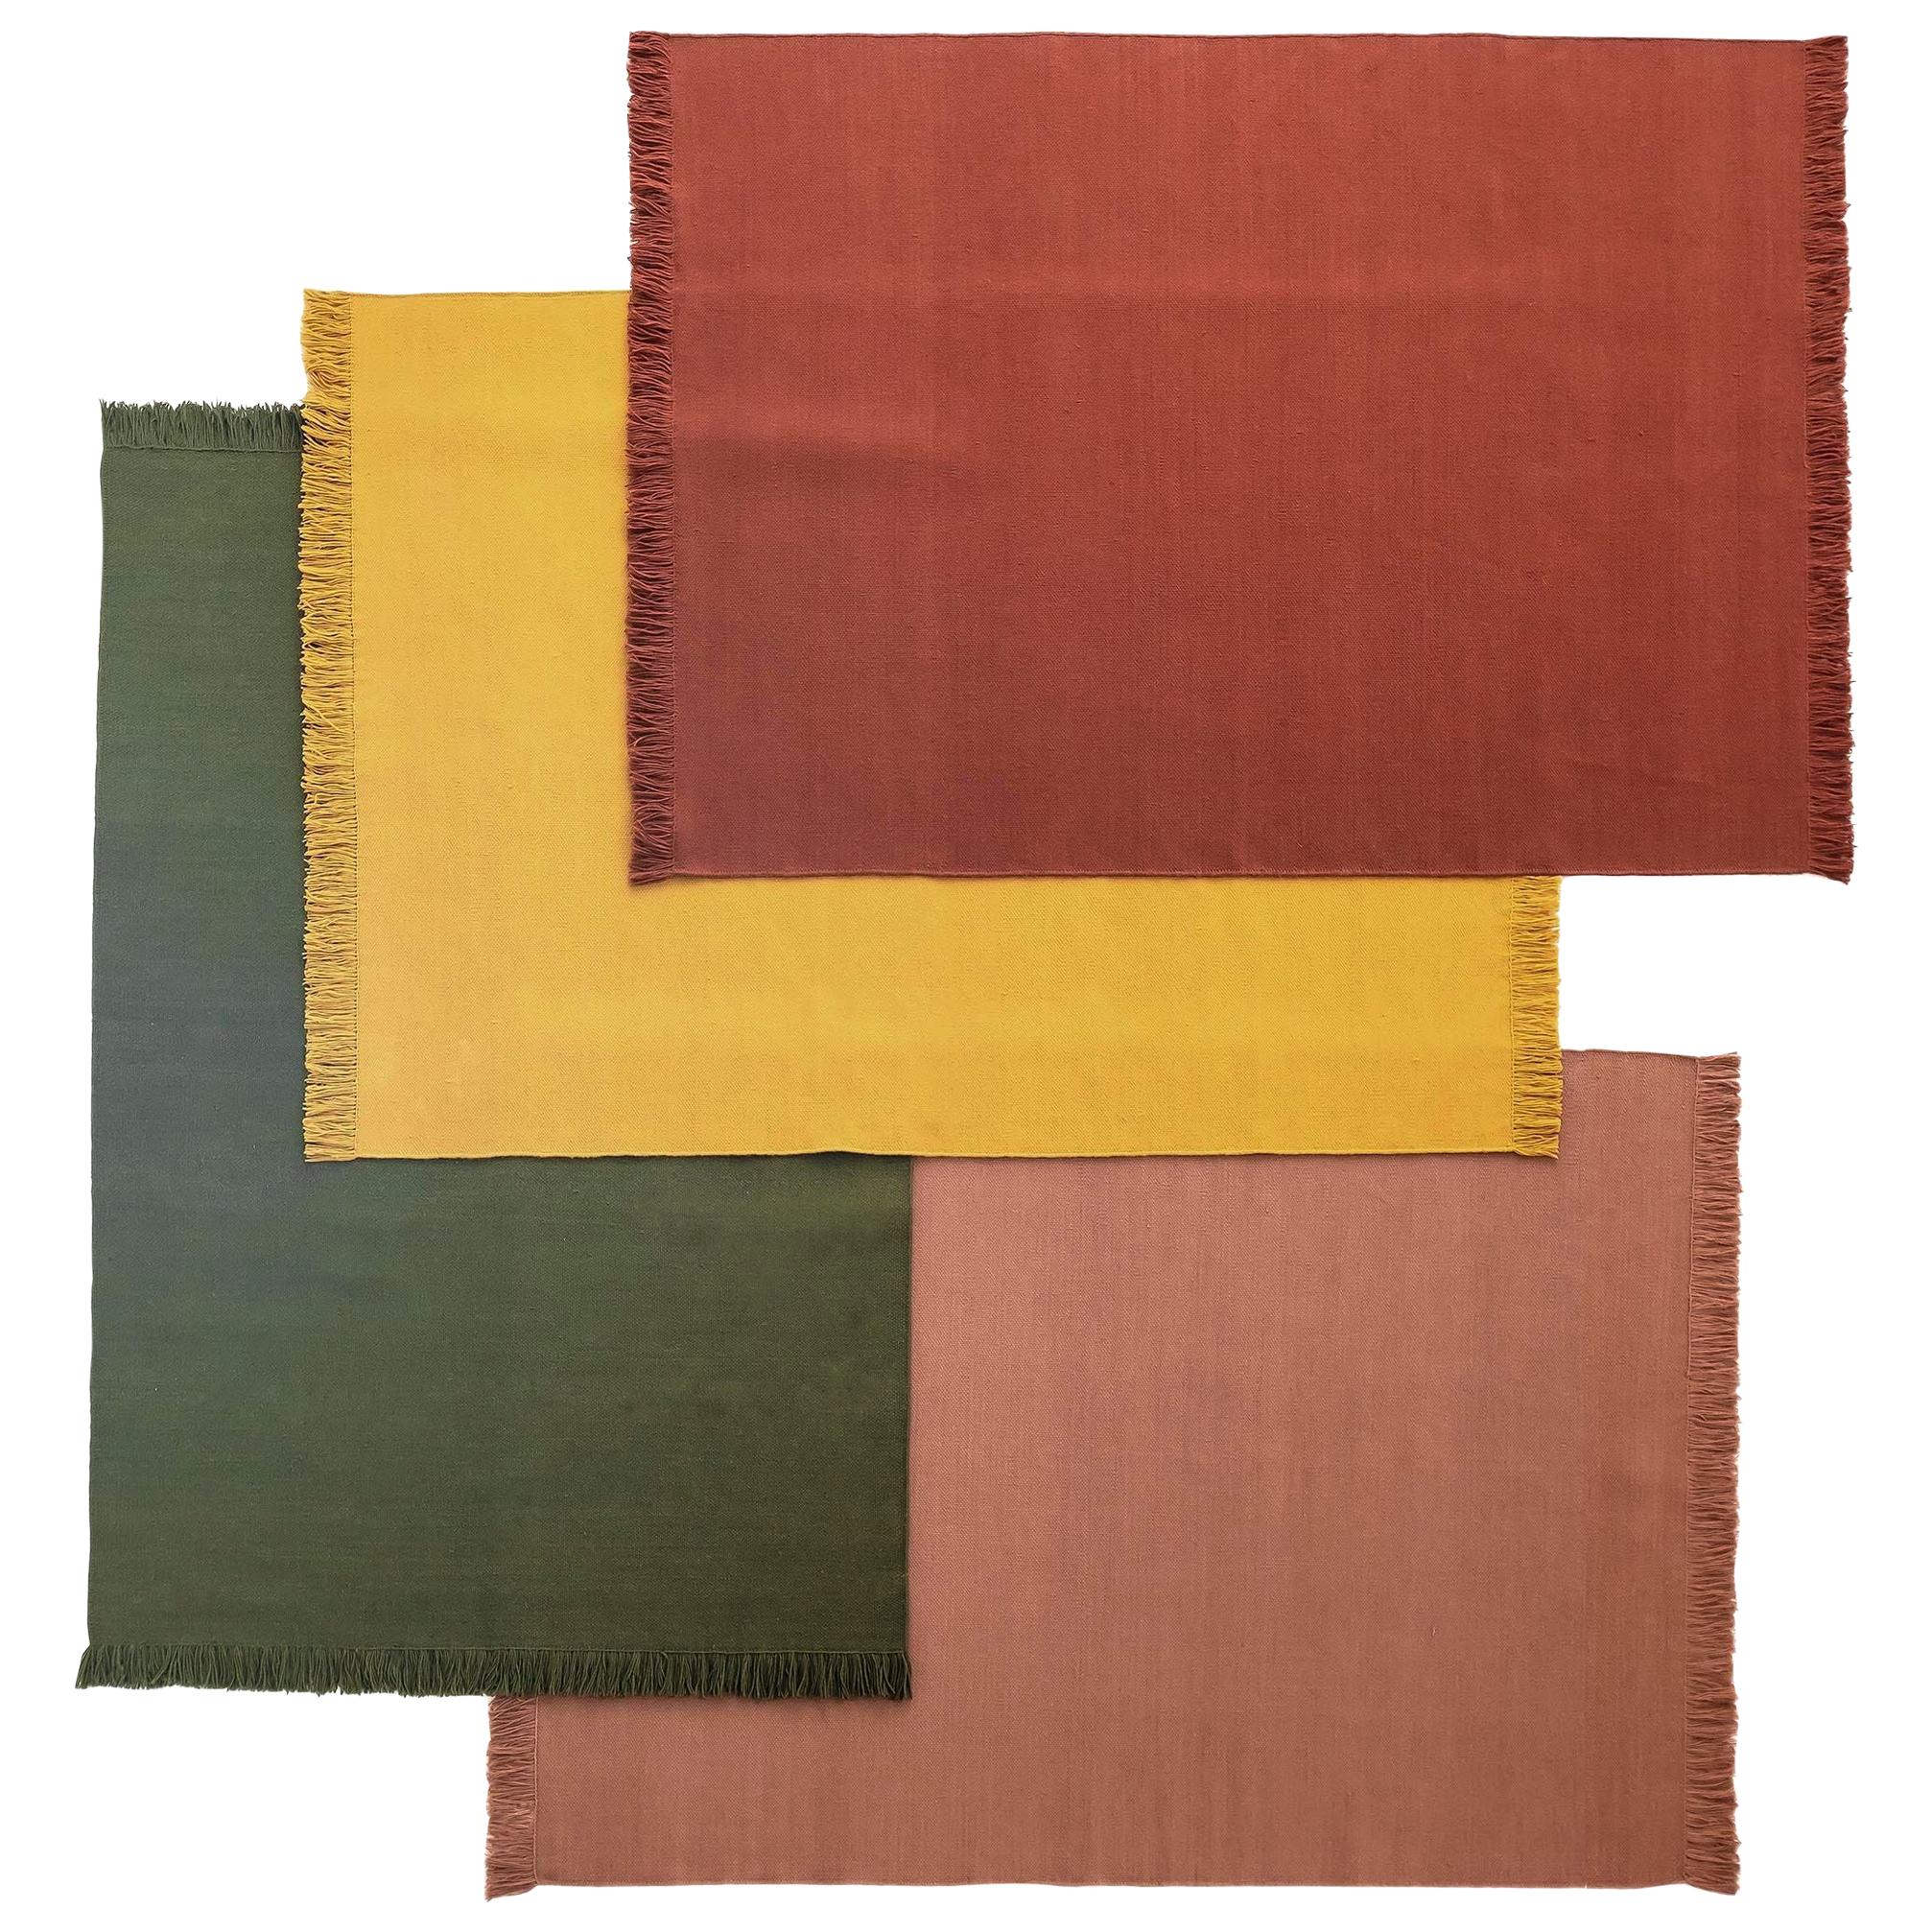 NEW - Colors Safron Dhurrie Standard Natural Wool Rug by Nani Marquina